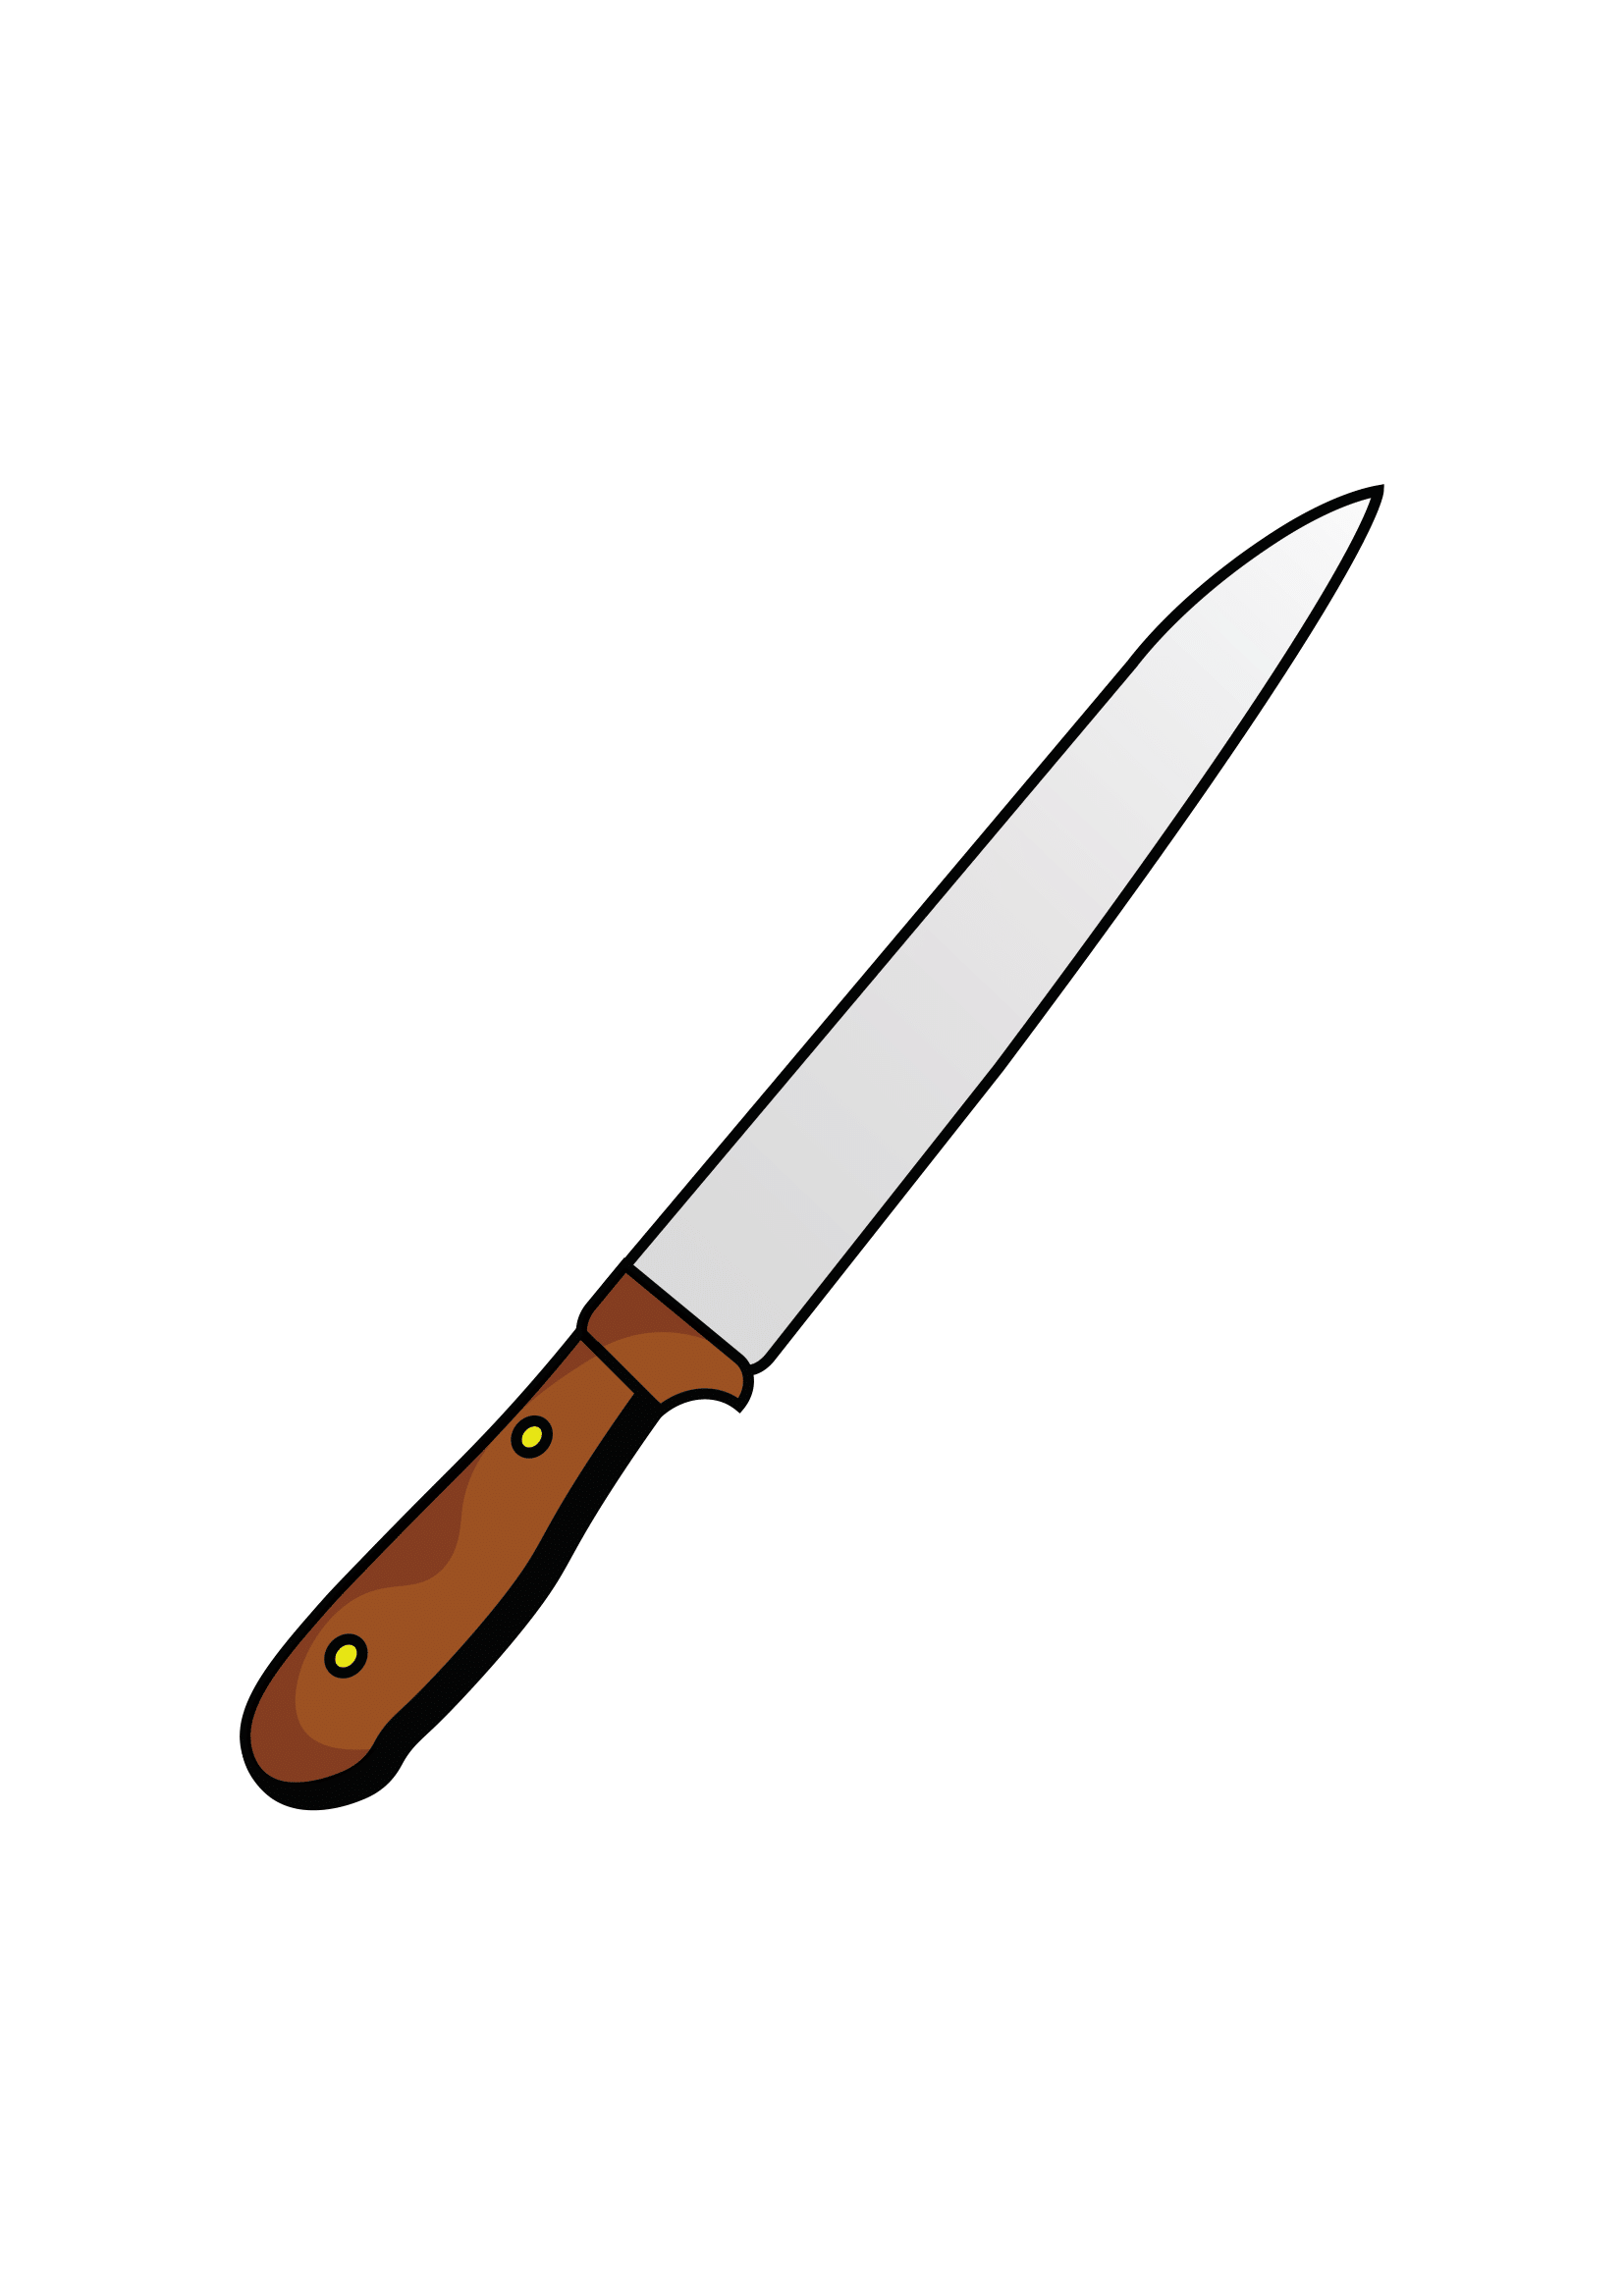 How to Draw A Knife Step by Step Printable